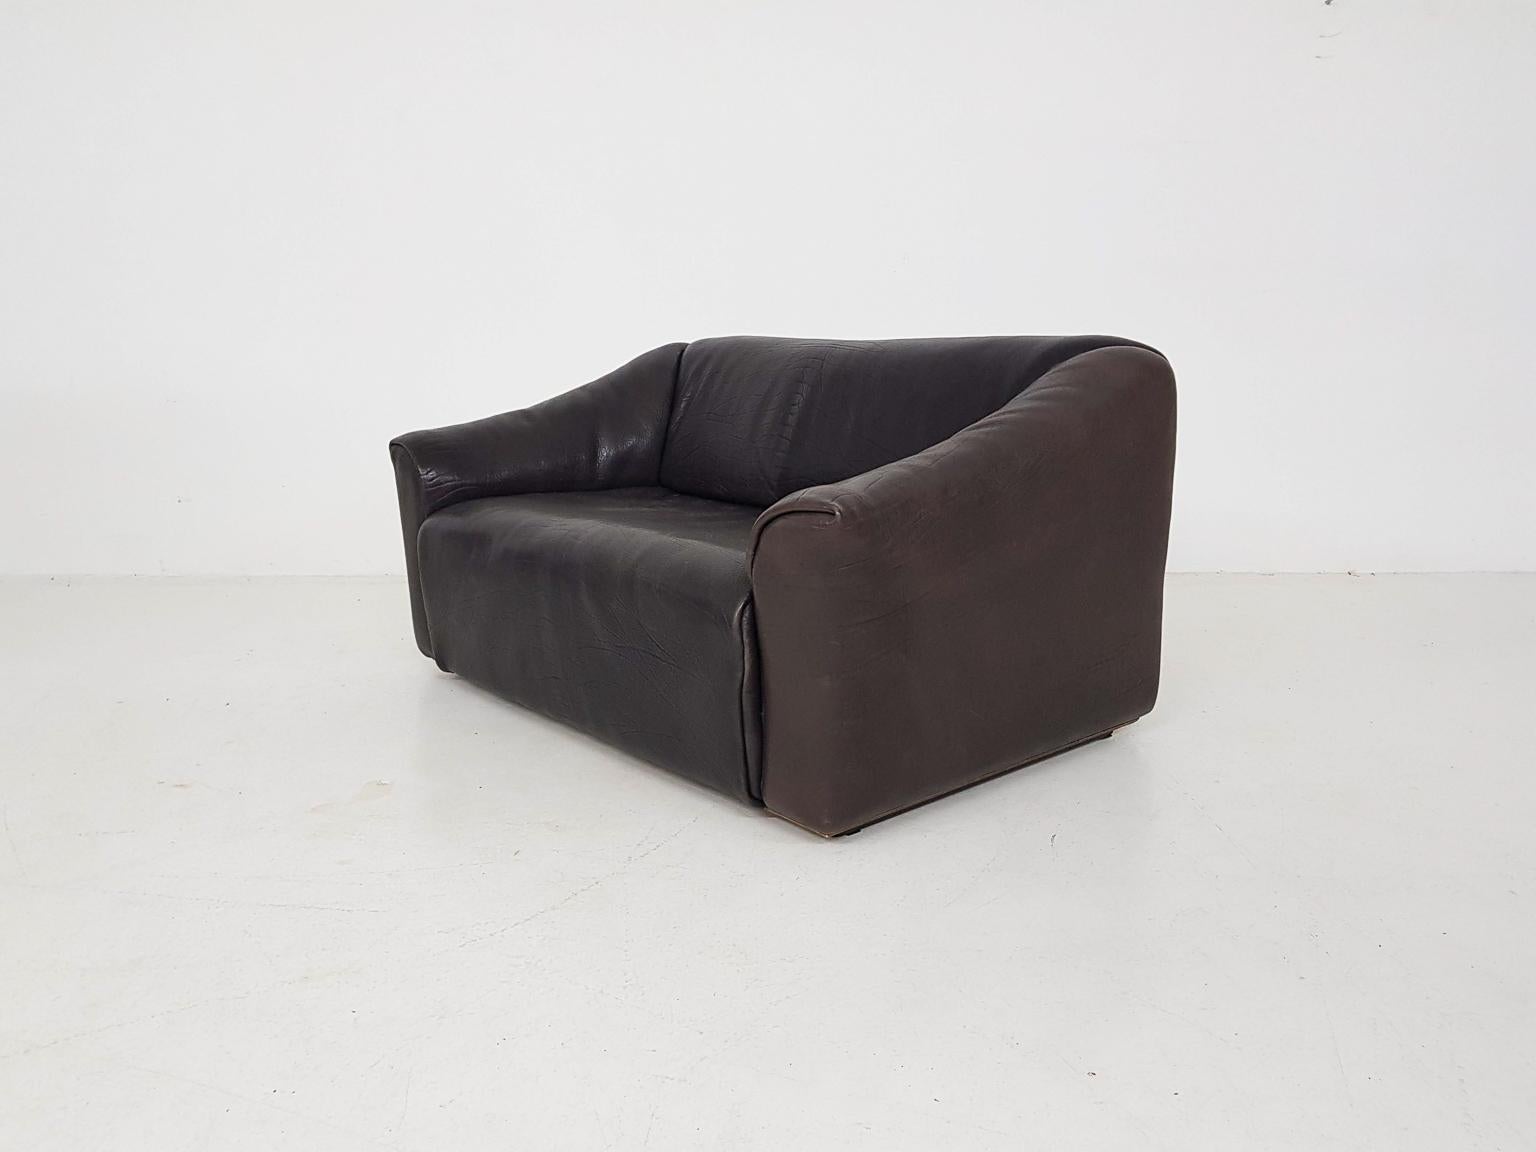 The famous and very high quality neck leather DS47 sofa by De Sede, manufactured in Switzerland in the 1970s.

This sofa really stand out because of its incredible thick leather that is used. Not often you will find a sofa with a leather quality